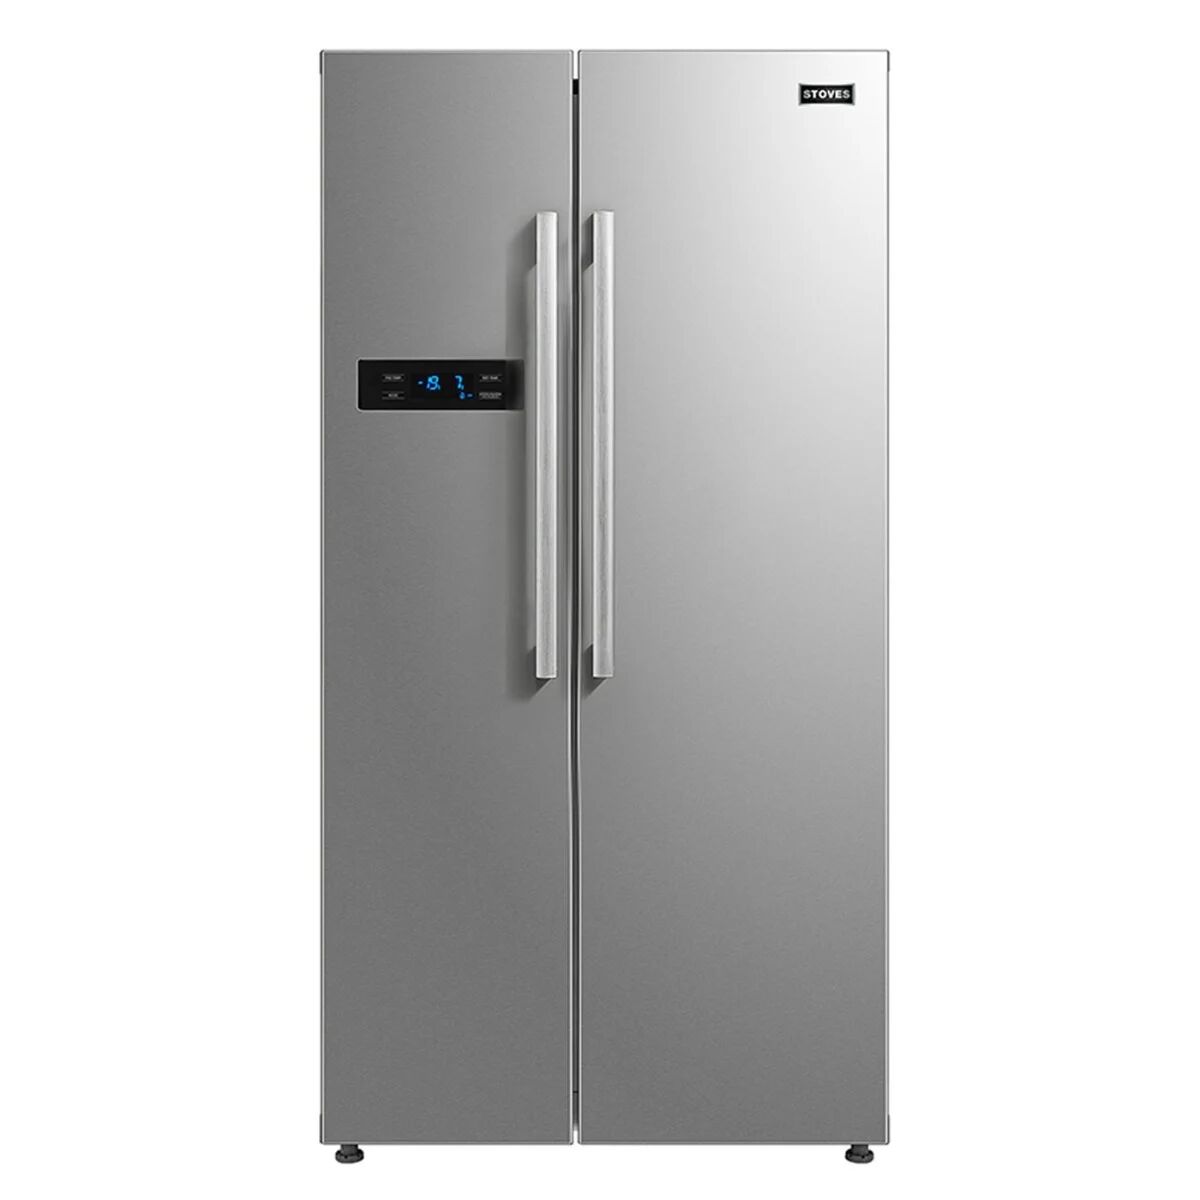 Stoves SXS909 Stainless Steel American Style Fridge Freezer - Stainless Steel